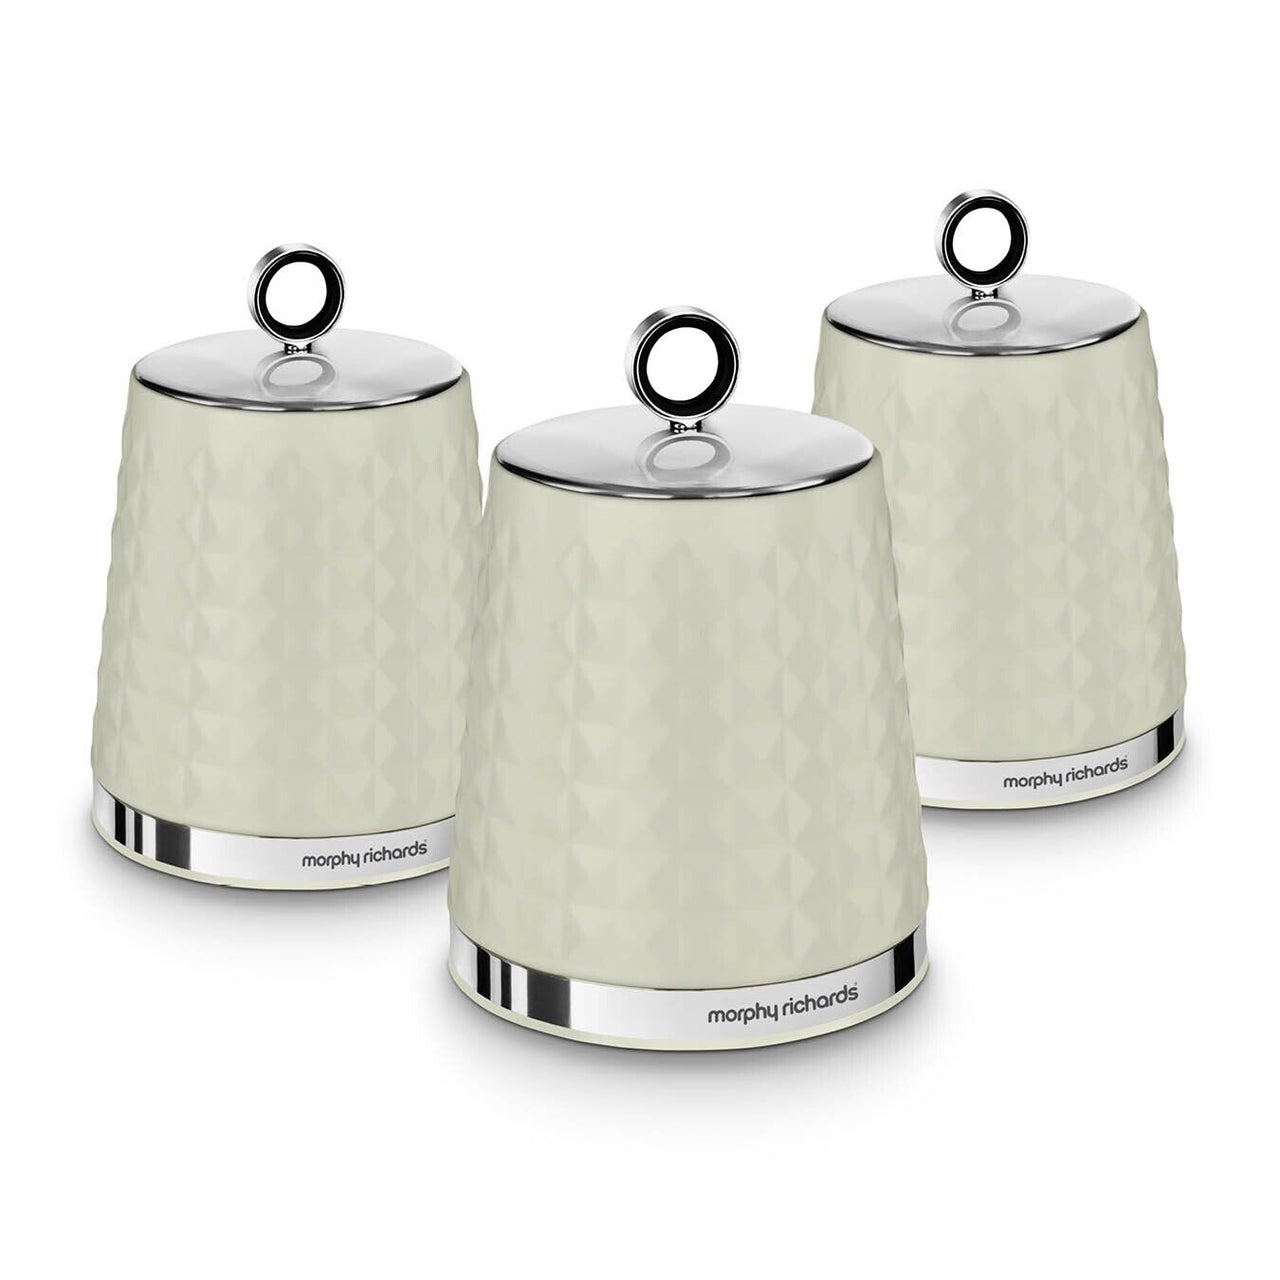 Morphy Richards Dimensions Tea, Coffee & Sugar Canisters Set of 3 in Ivory Cream 978055